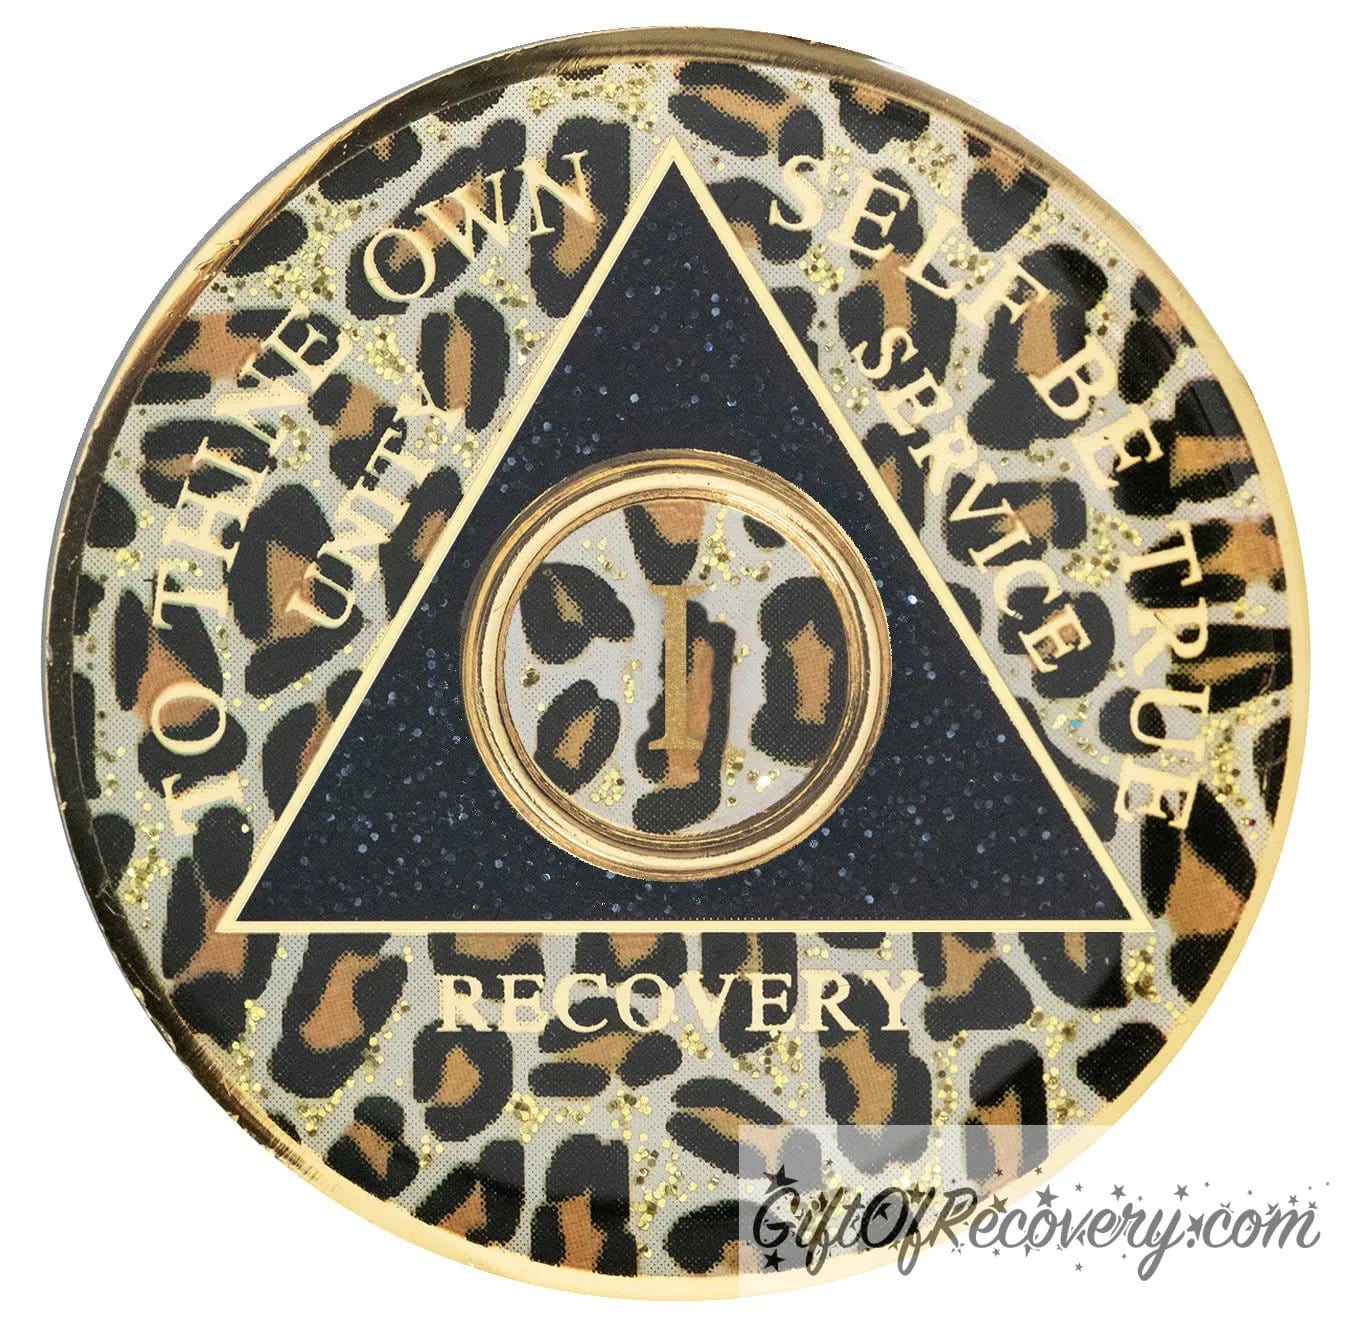 1 year AA medallion leopard print with gold flaked spots, to thine own self be true, unity, service, recovery, and roman numeral are gold foil so you can let your recovery shine, not your time, the circle triangle is embossed with 14k gold-plated brass, the recovery medallion is sealed with resin for a shiny finish.